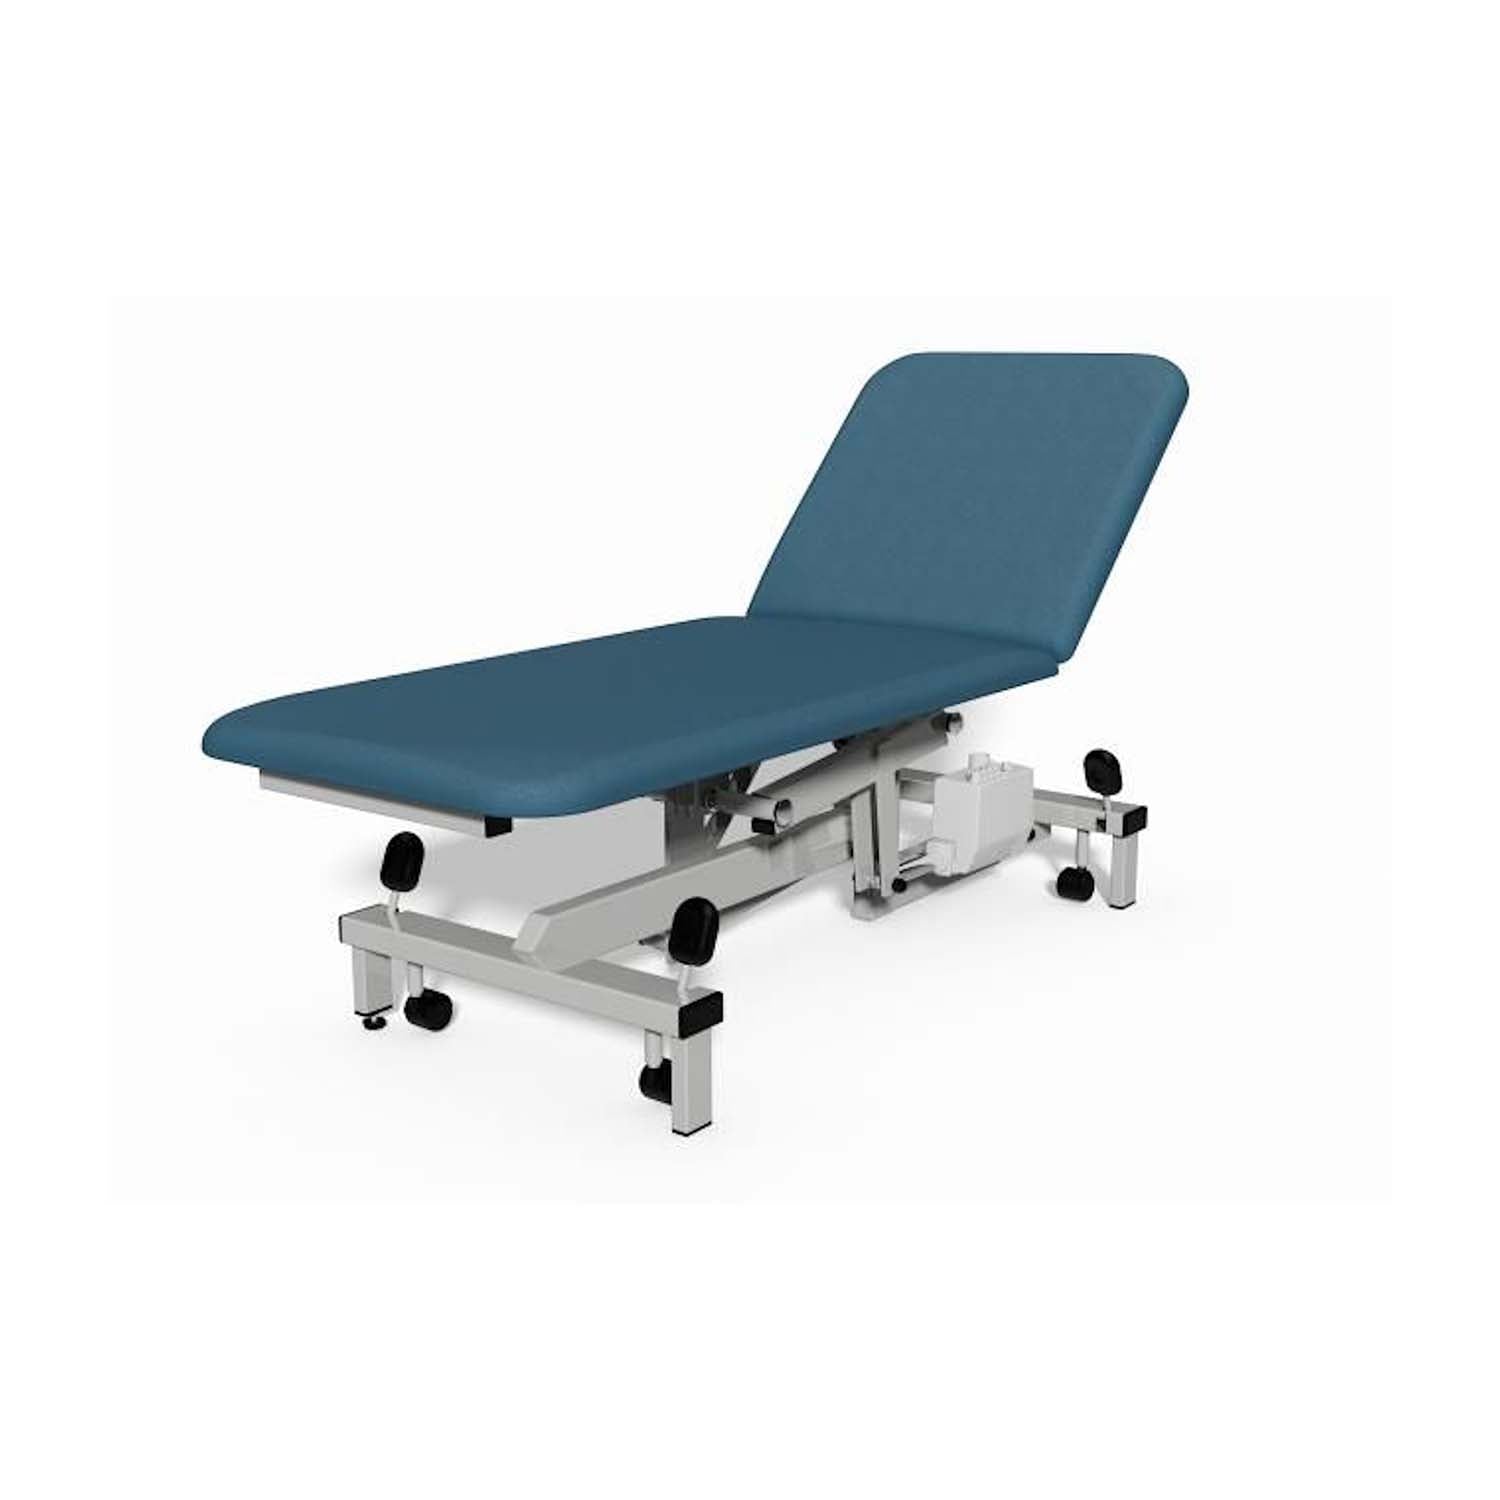 Plinth 2000 Model 502 Examination Couch | Electric | Apple Mint